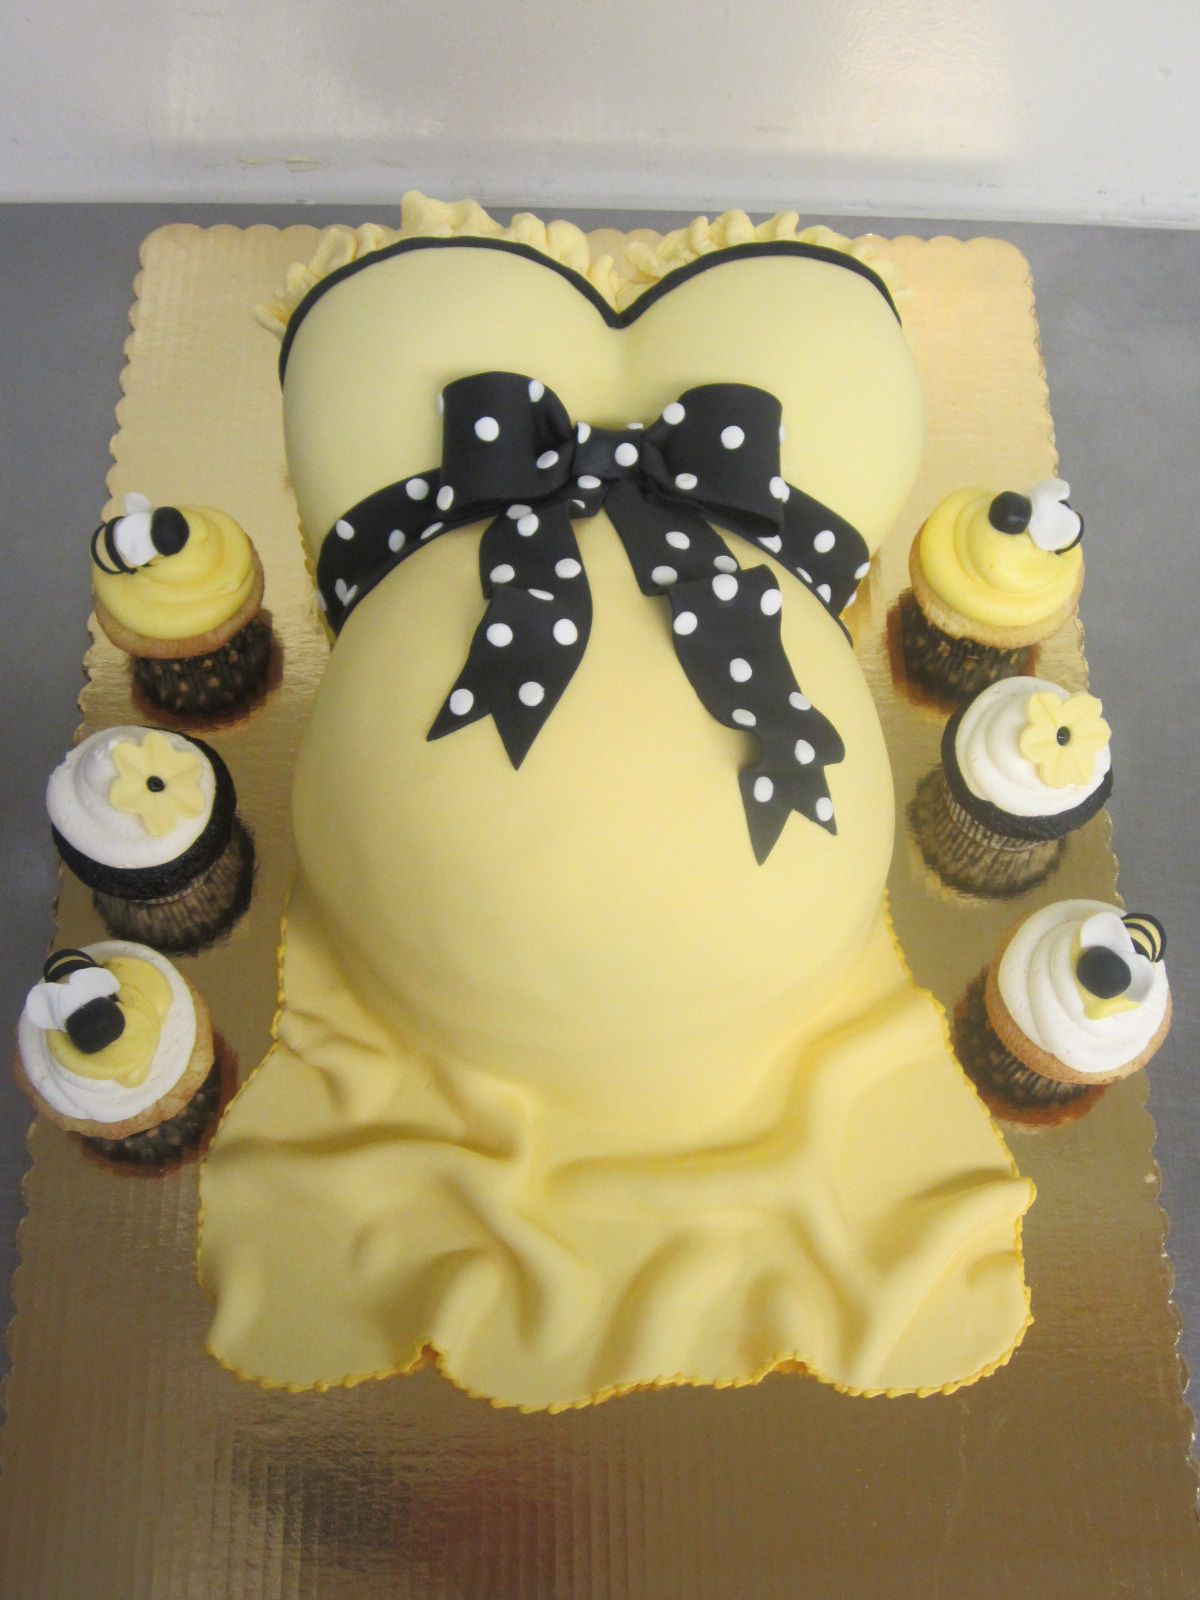 Baby Shower Cake Decoration Ideas
 Pregnant Belly Cake with Footprint